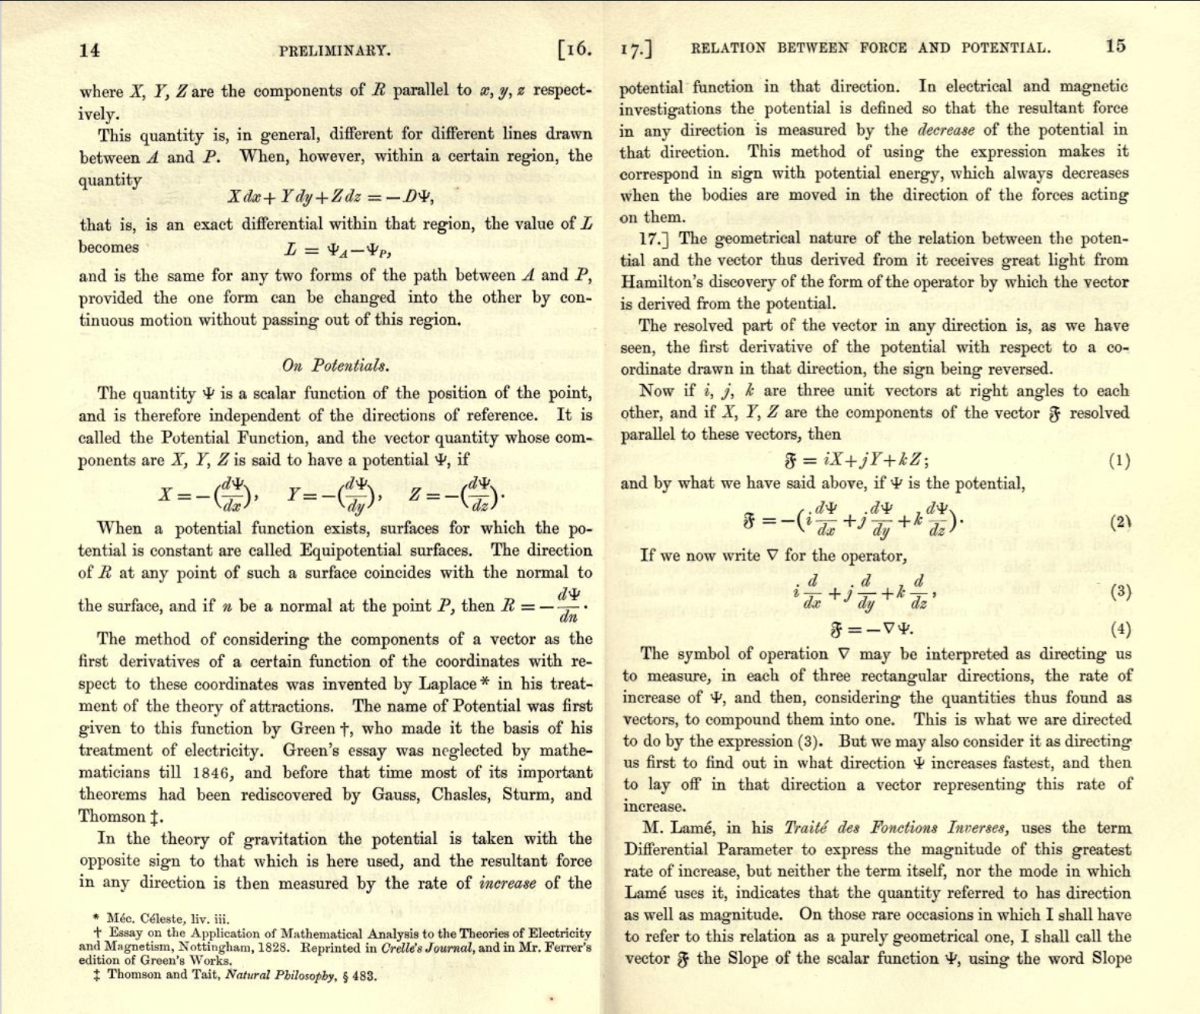 Pages 14-15 from volume 1 of James Clerk Maxwell's 1873 Treatise on Electricity and Magnetism.